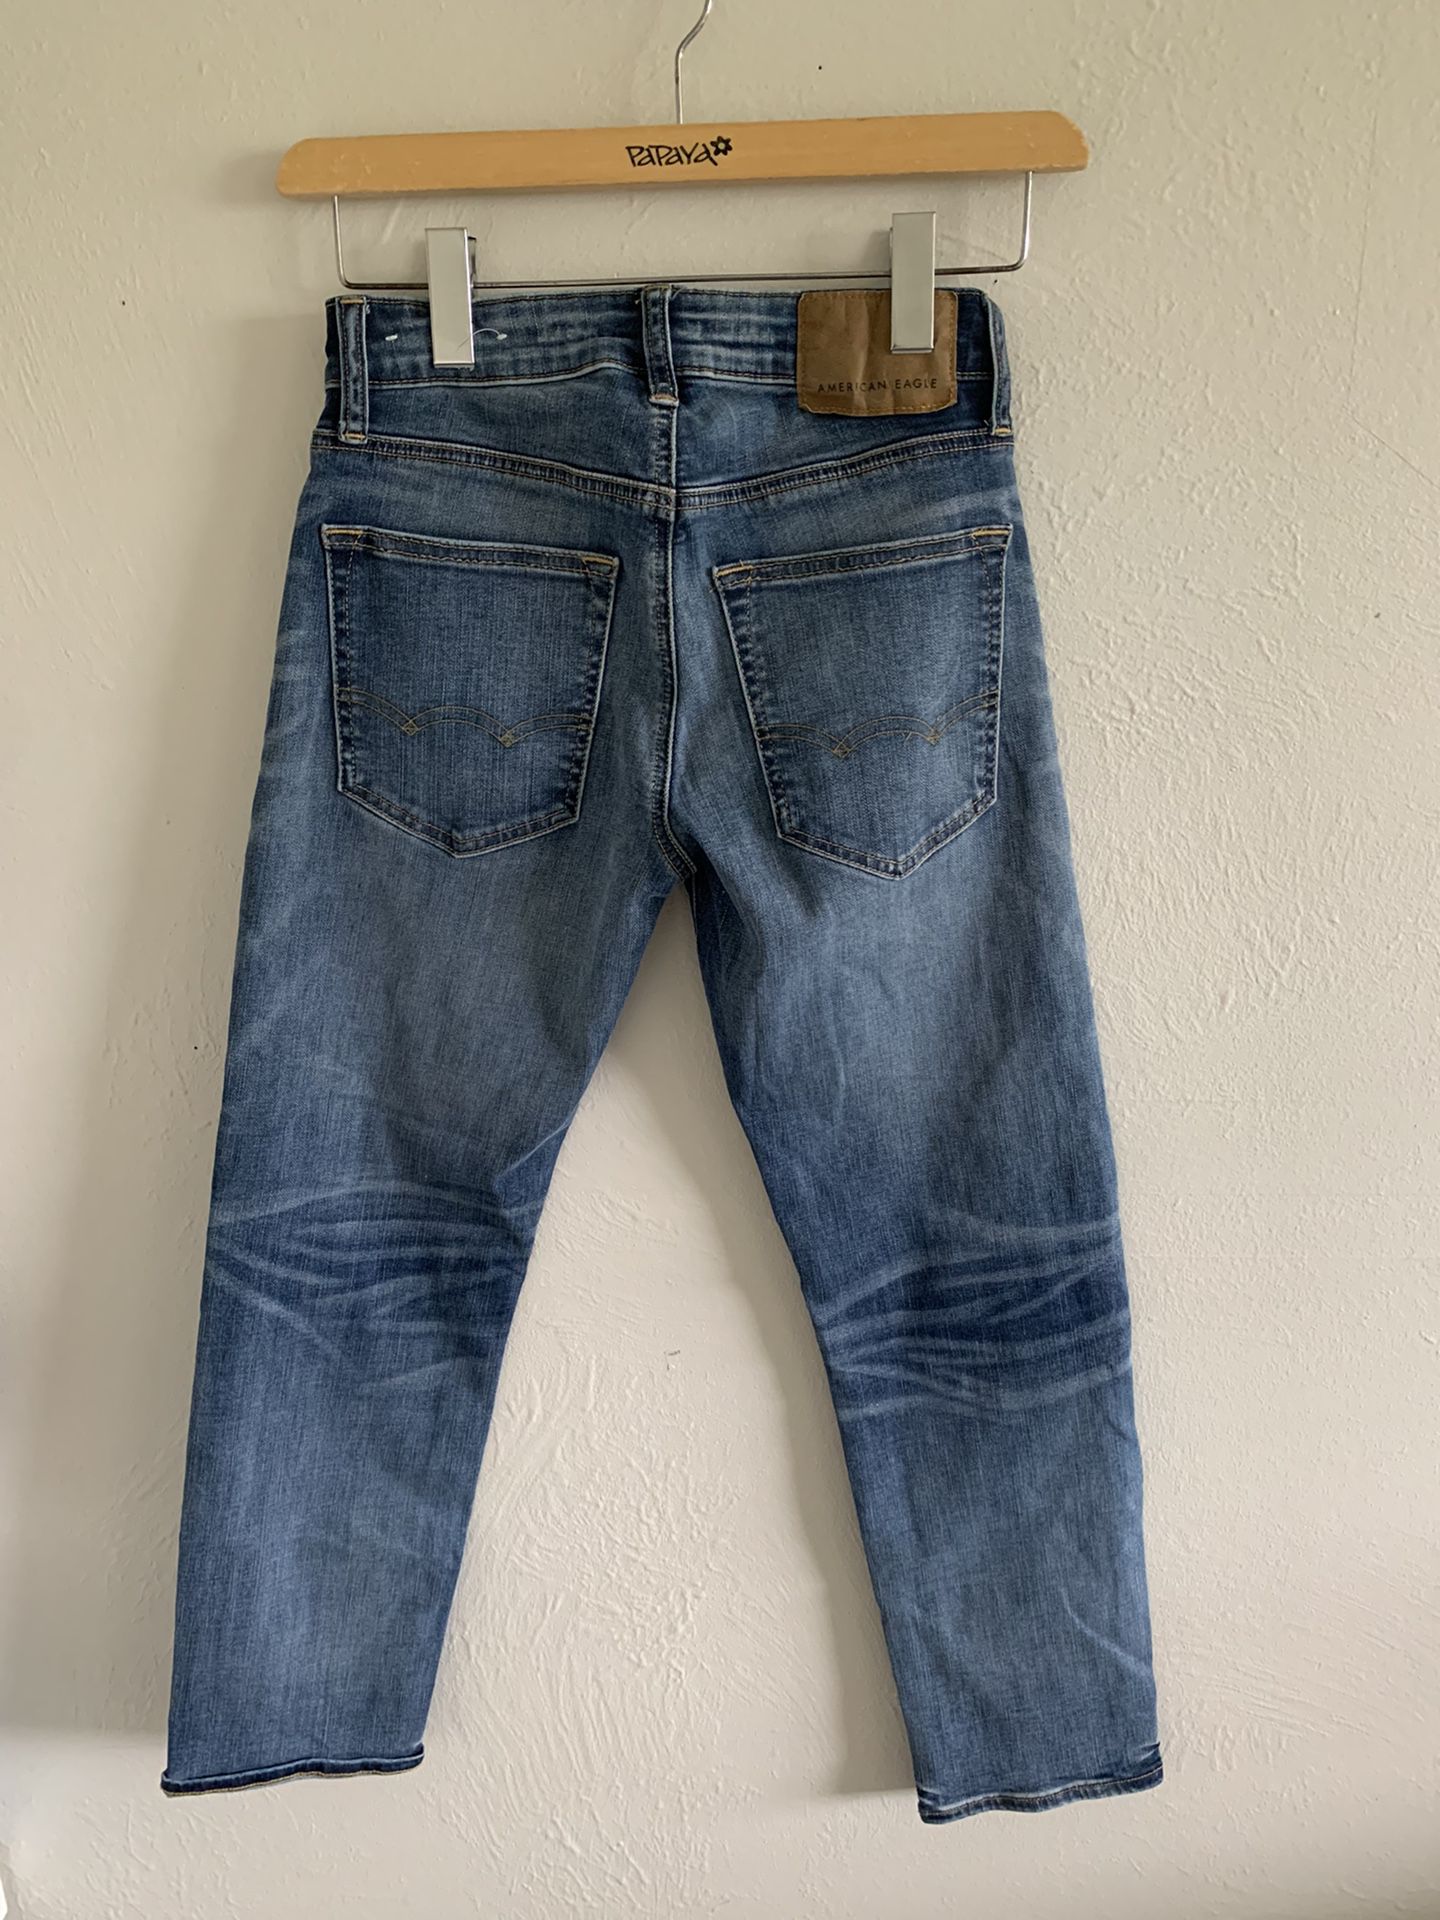 American Eagle Jeans for Sale in Tacoma, WA - OfferUp